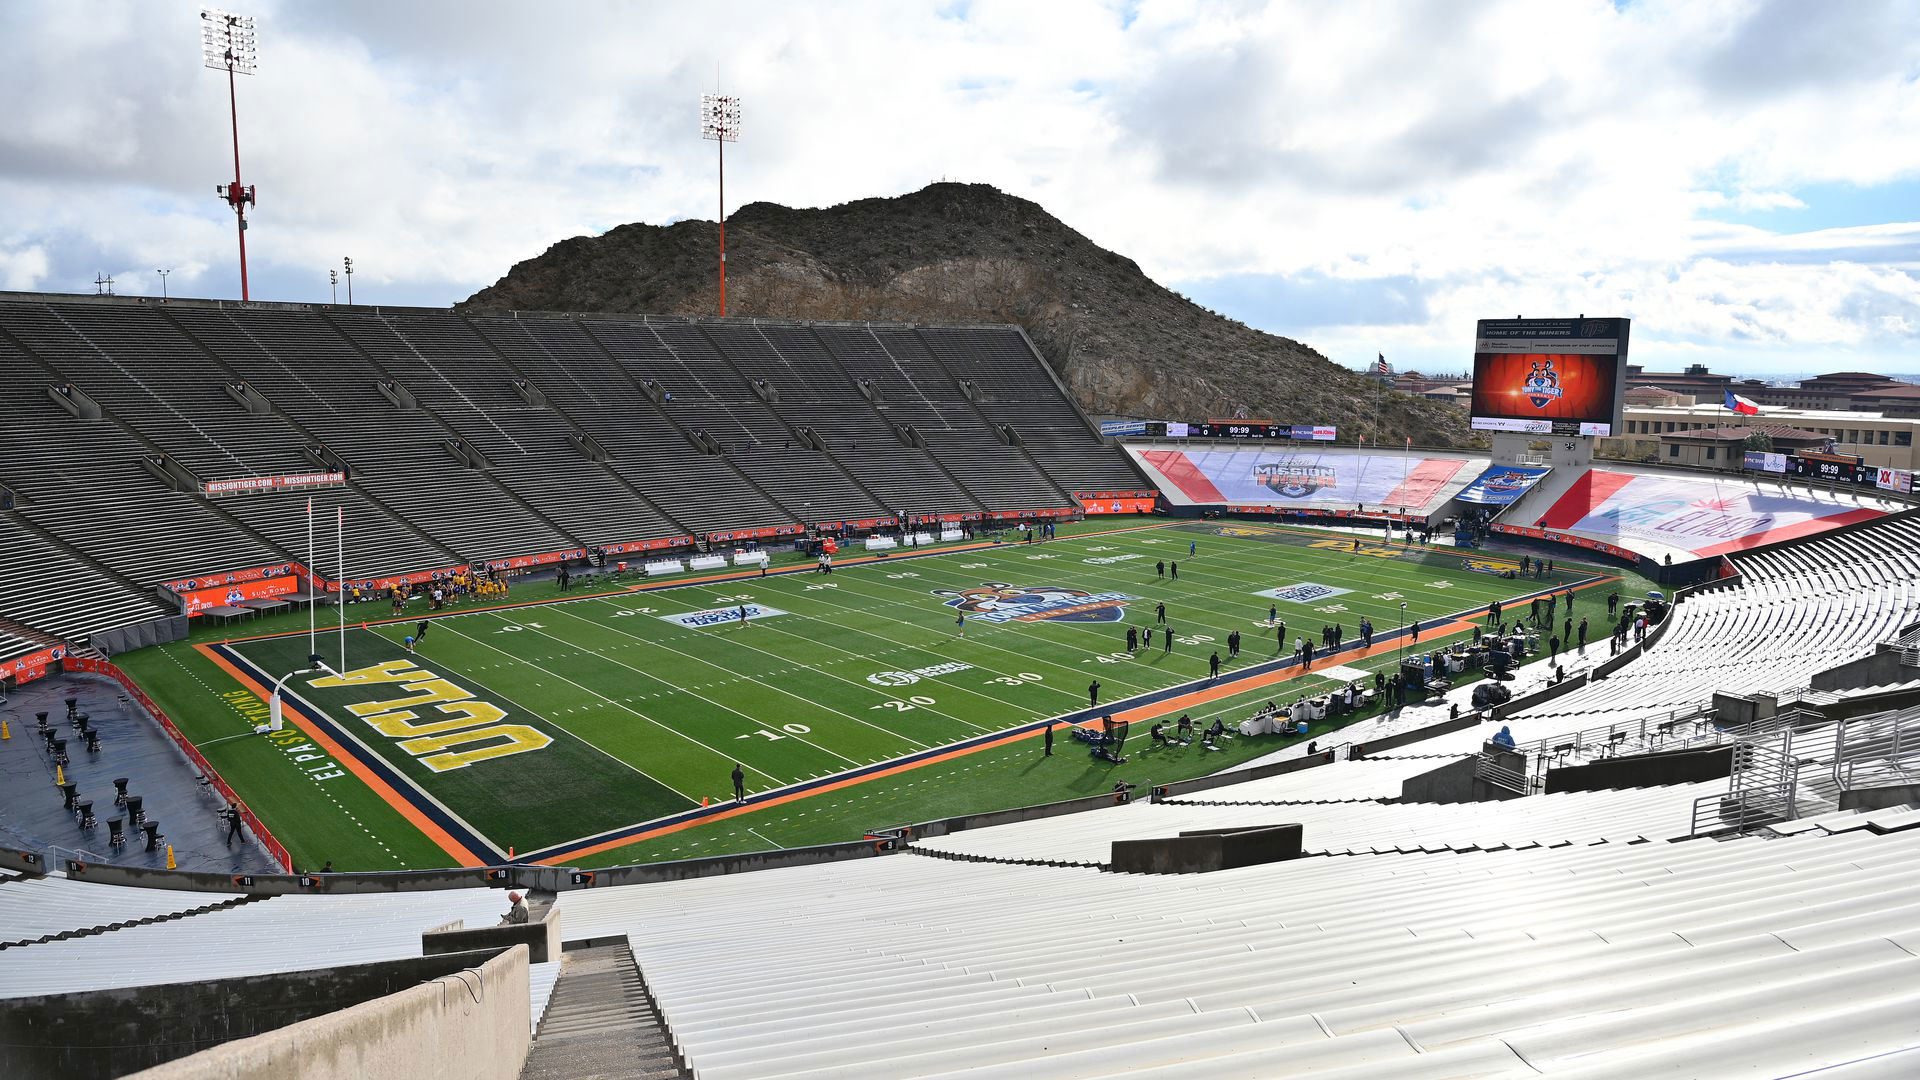 It’s the Sun Bowl for Notre Dame against Oregon State